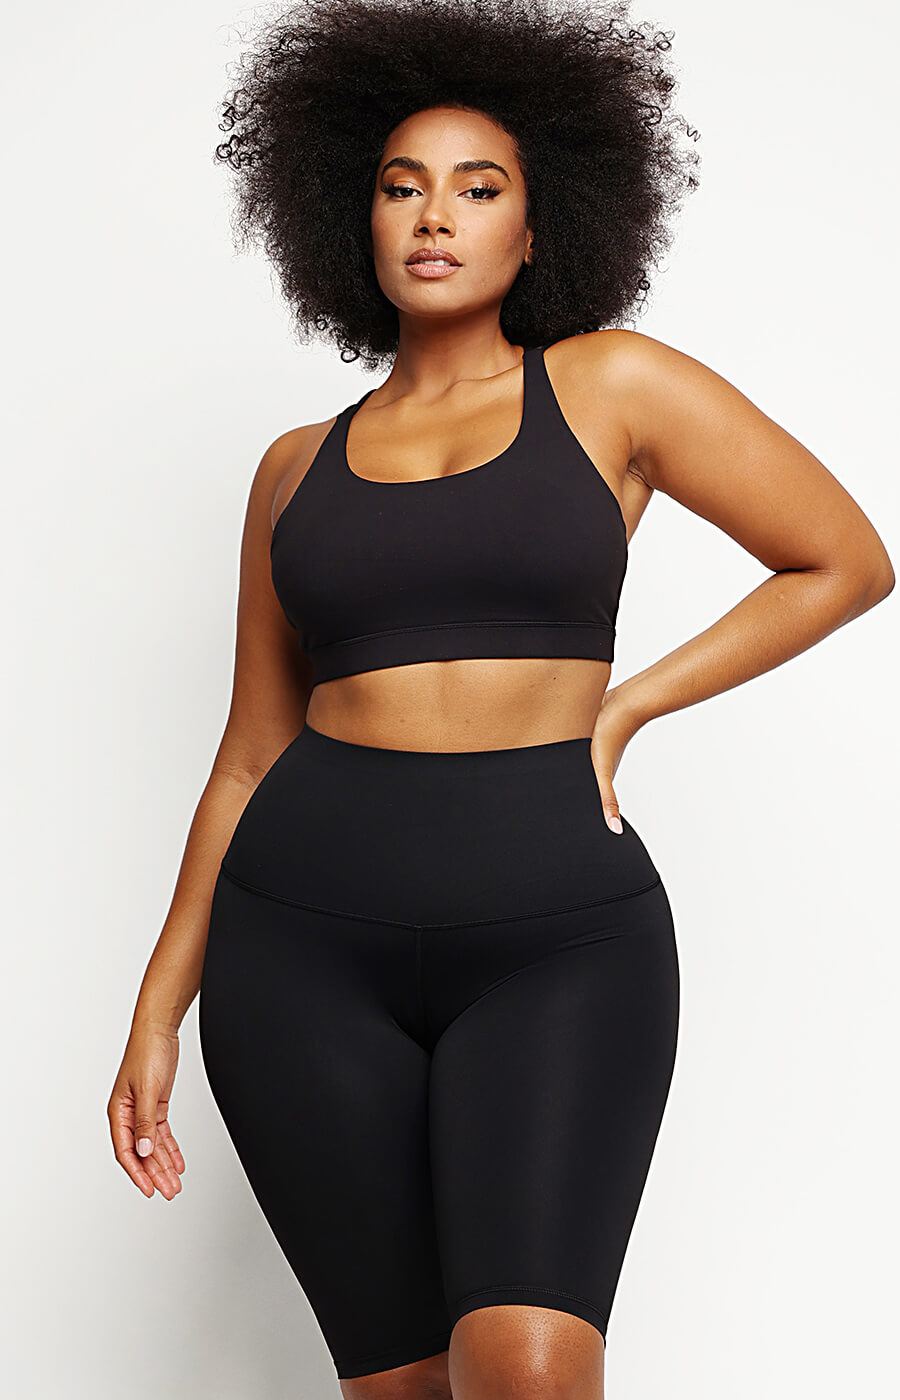 Stylish and Figure-Flattering Looks for Love Handles